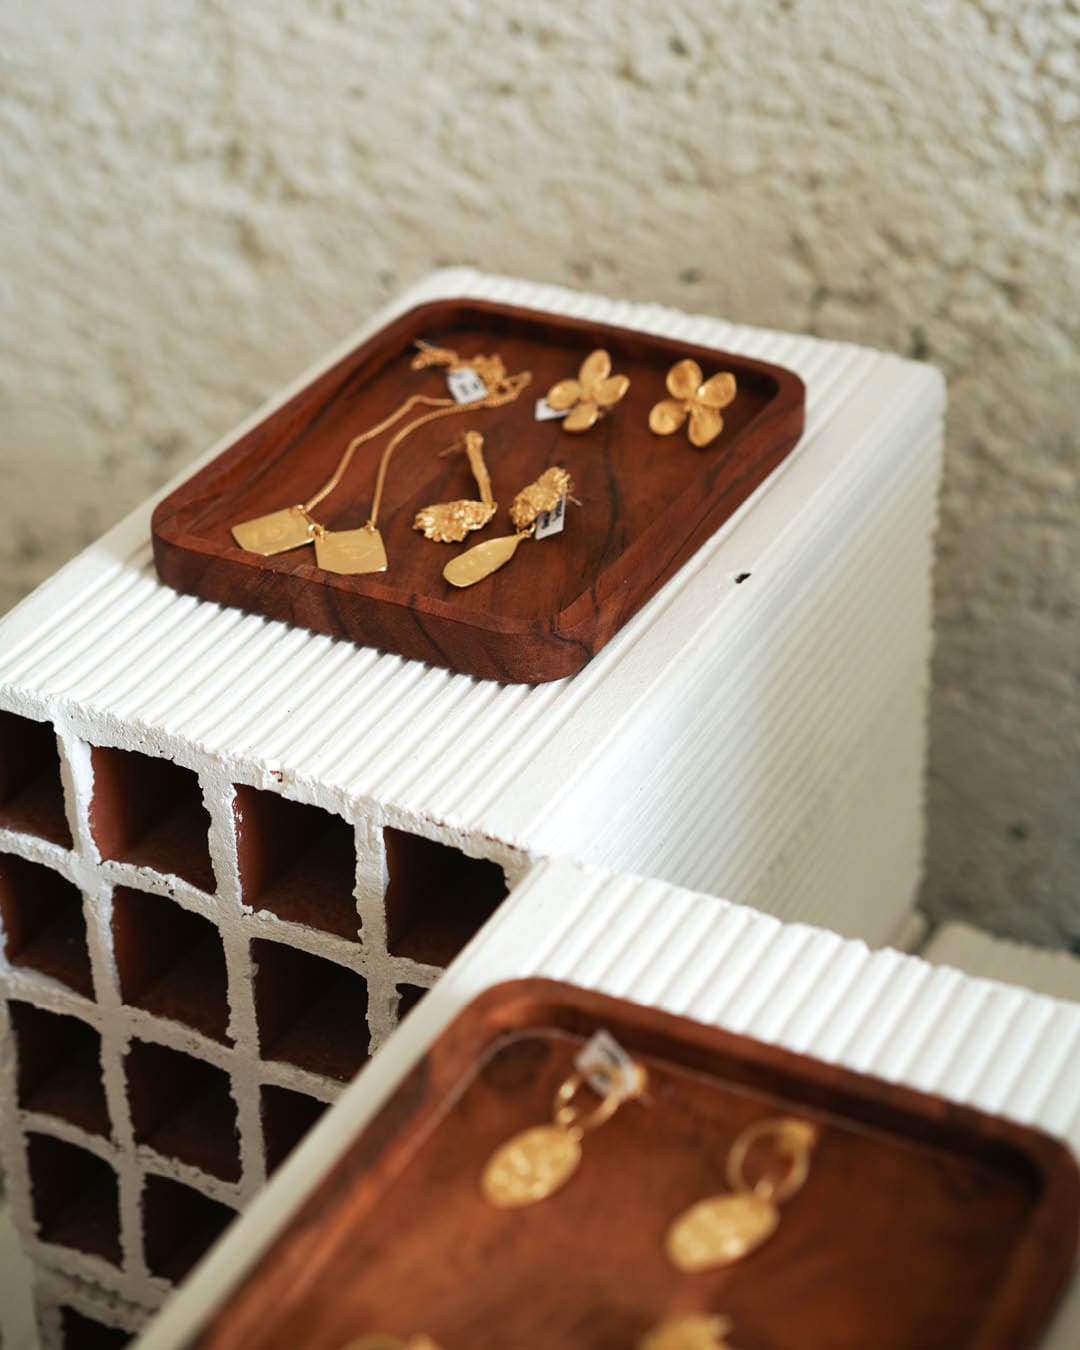 Jewellery on display on small wooden trays at Mustique shop in Lisbon